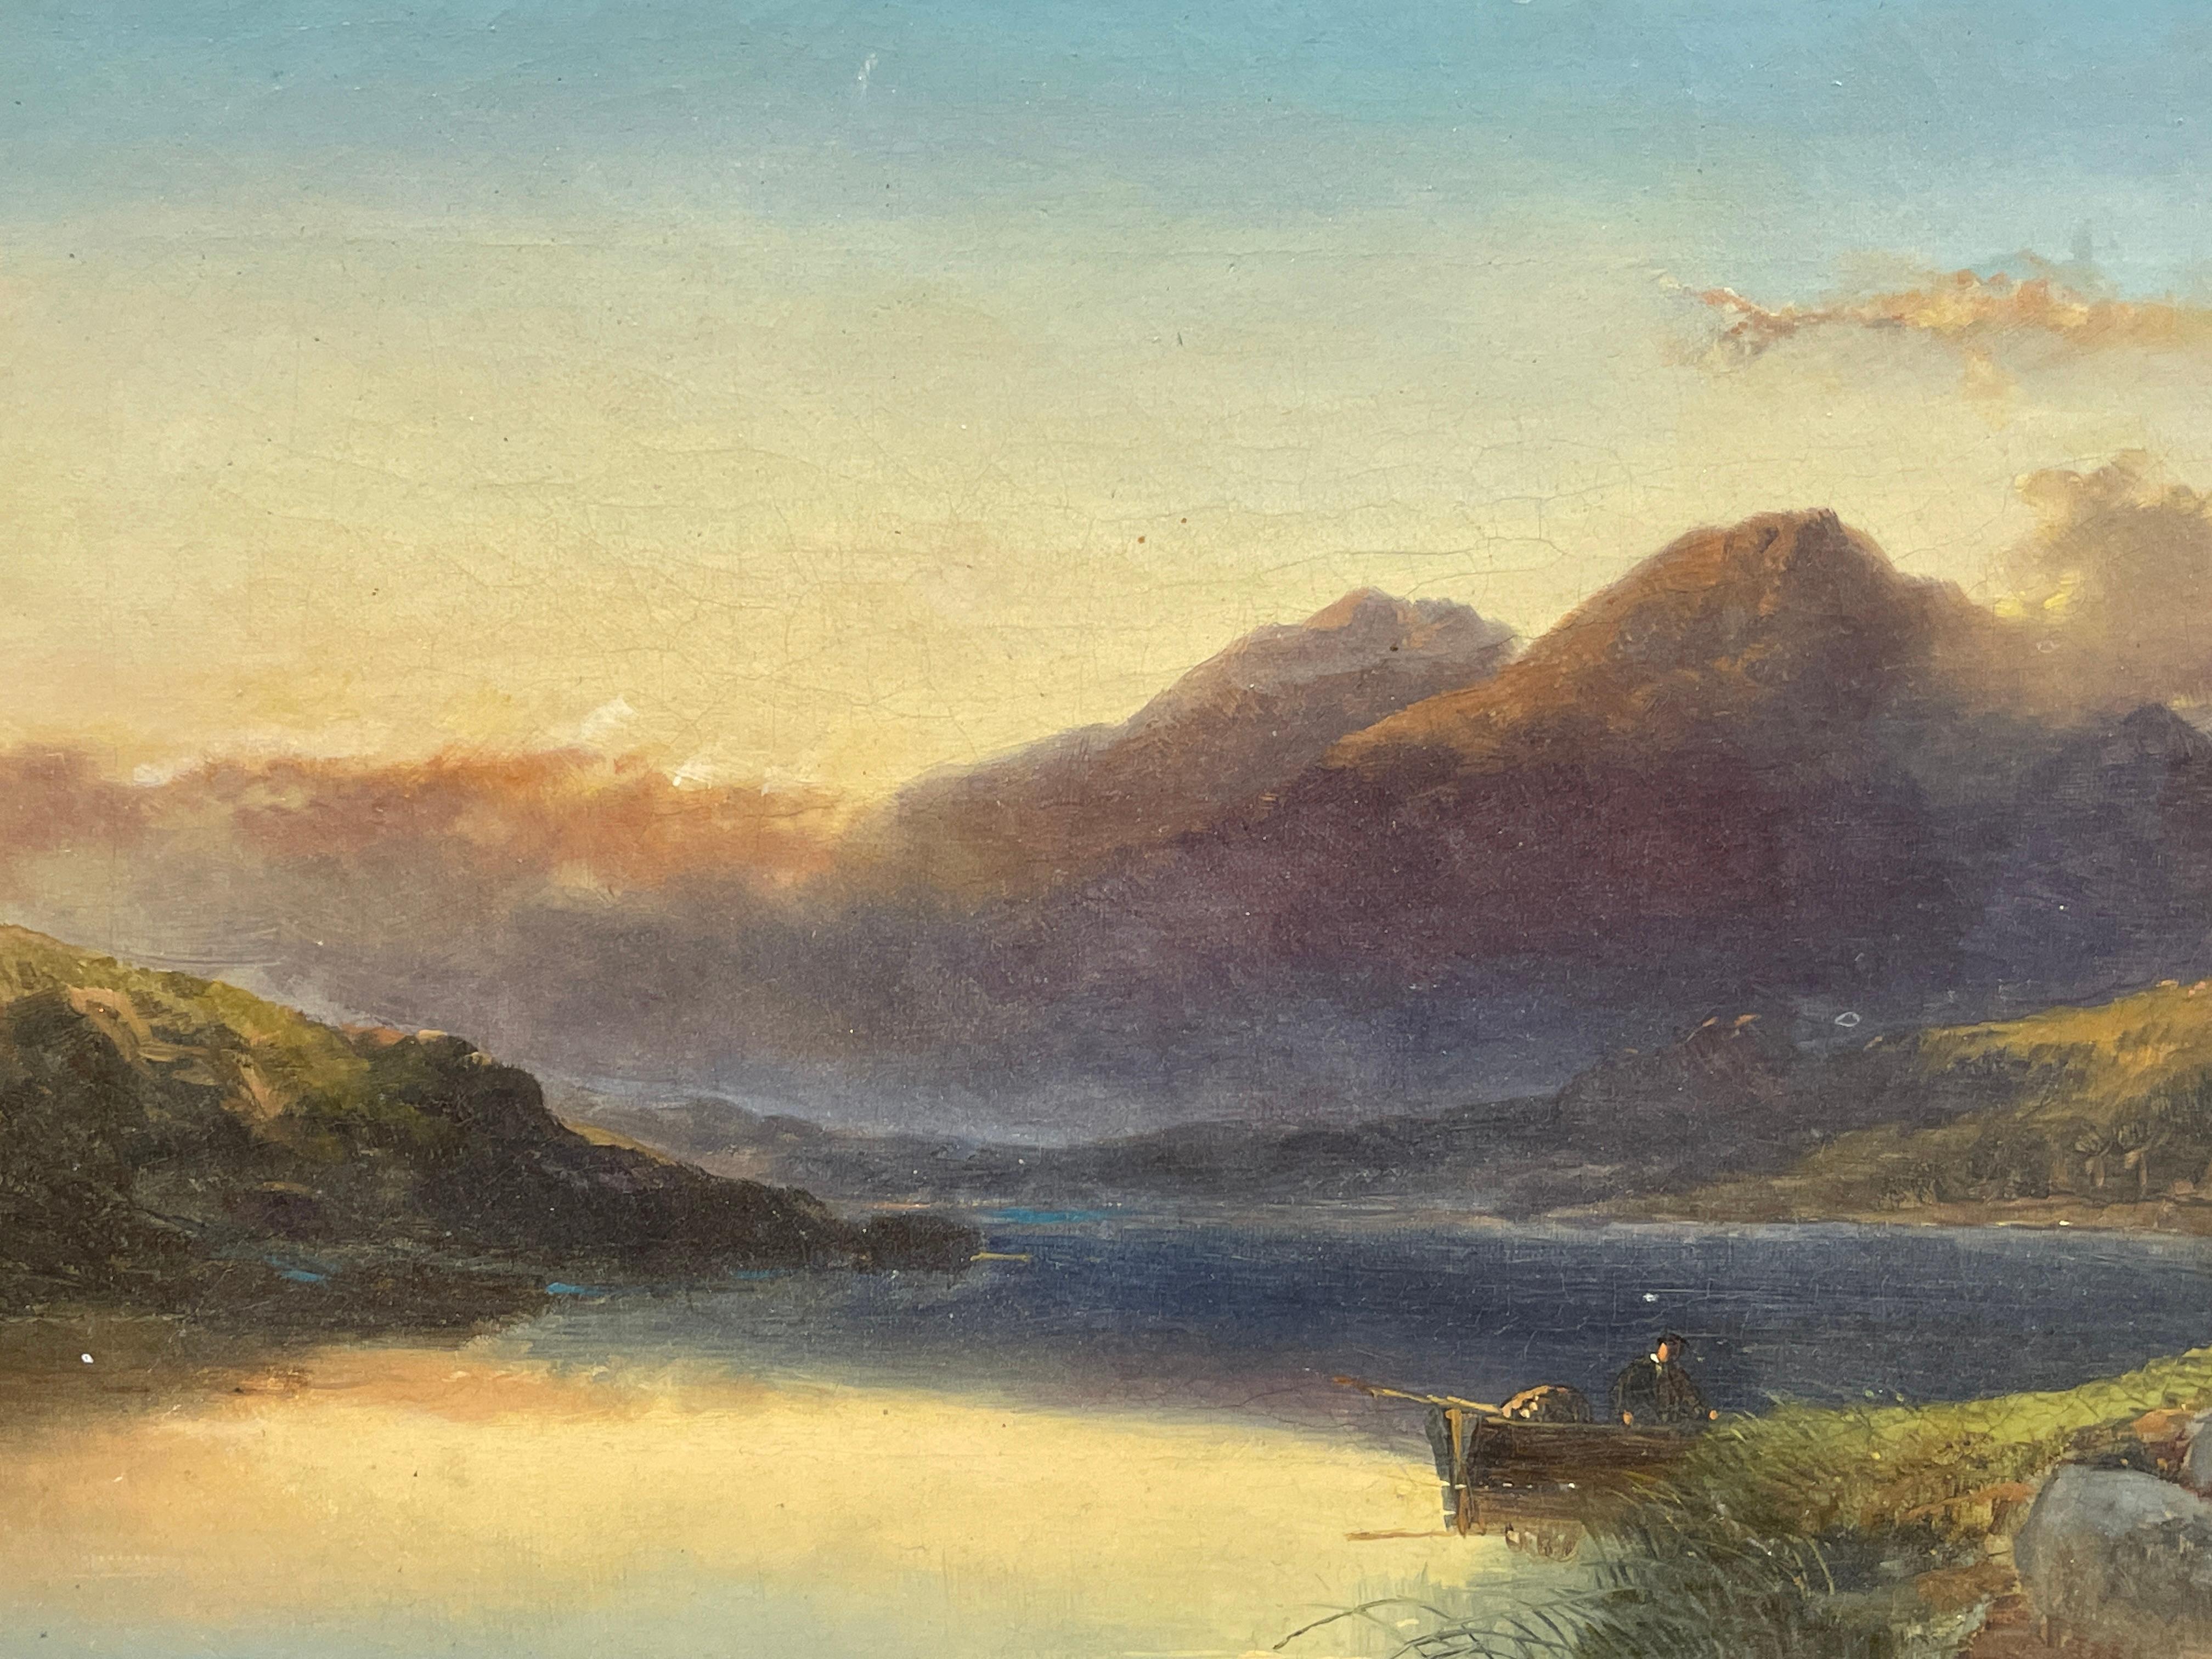 Joseph Horlor (1809-1887) British
A Figure in a rowing boat at dusk on a mountain lake, Scottish
oil painting on canvas, signed lower right: 9 x 14 inches
plus frame: 12.5 x 18 inches

condition: relined, restored to a high standard, very